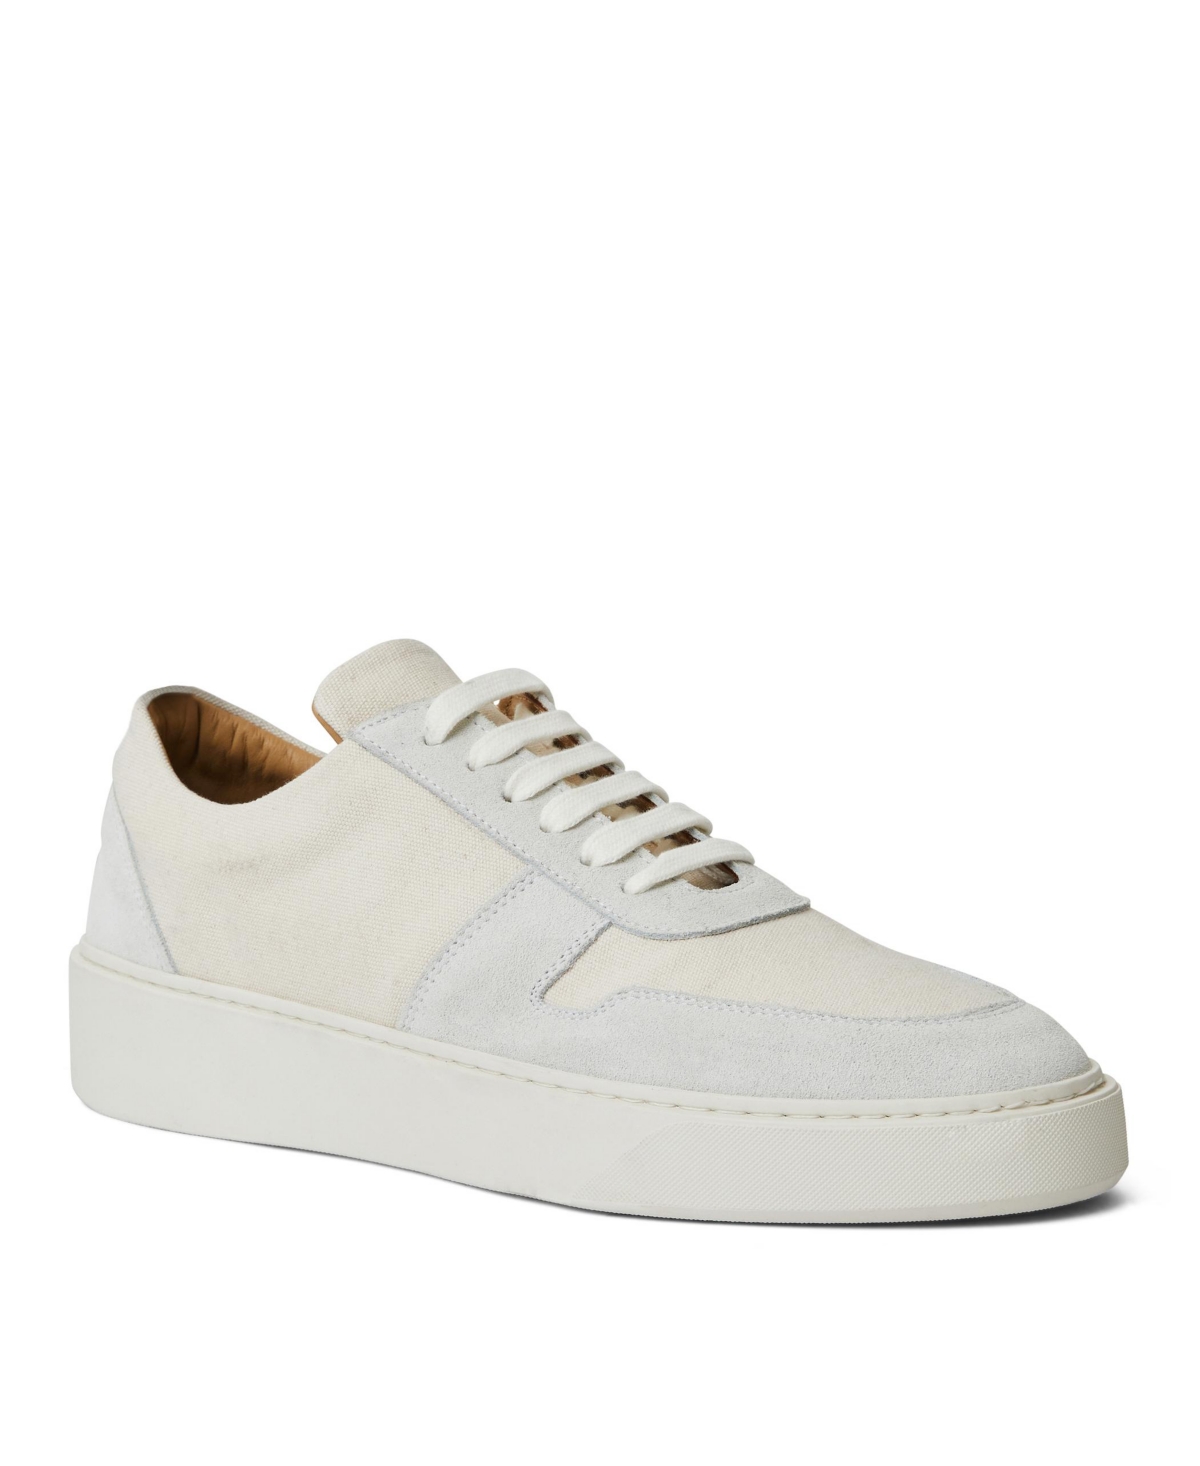 Men's Darian Leather Sneakers - Sand Canvas